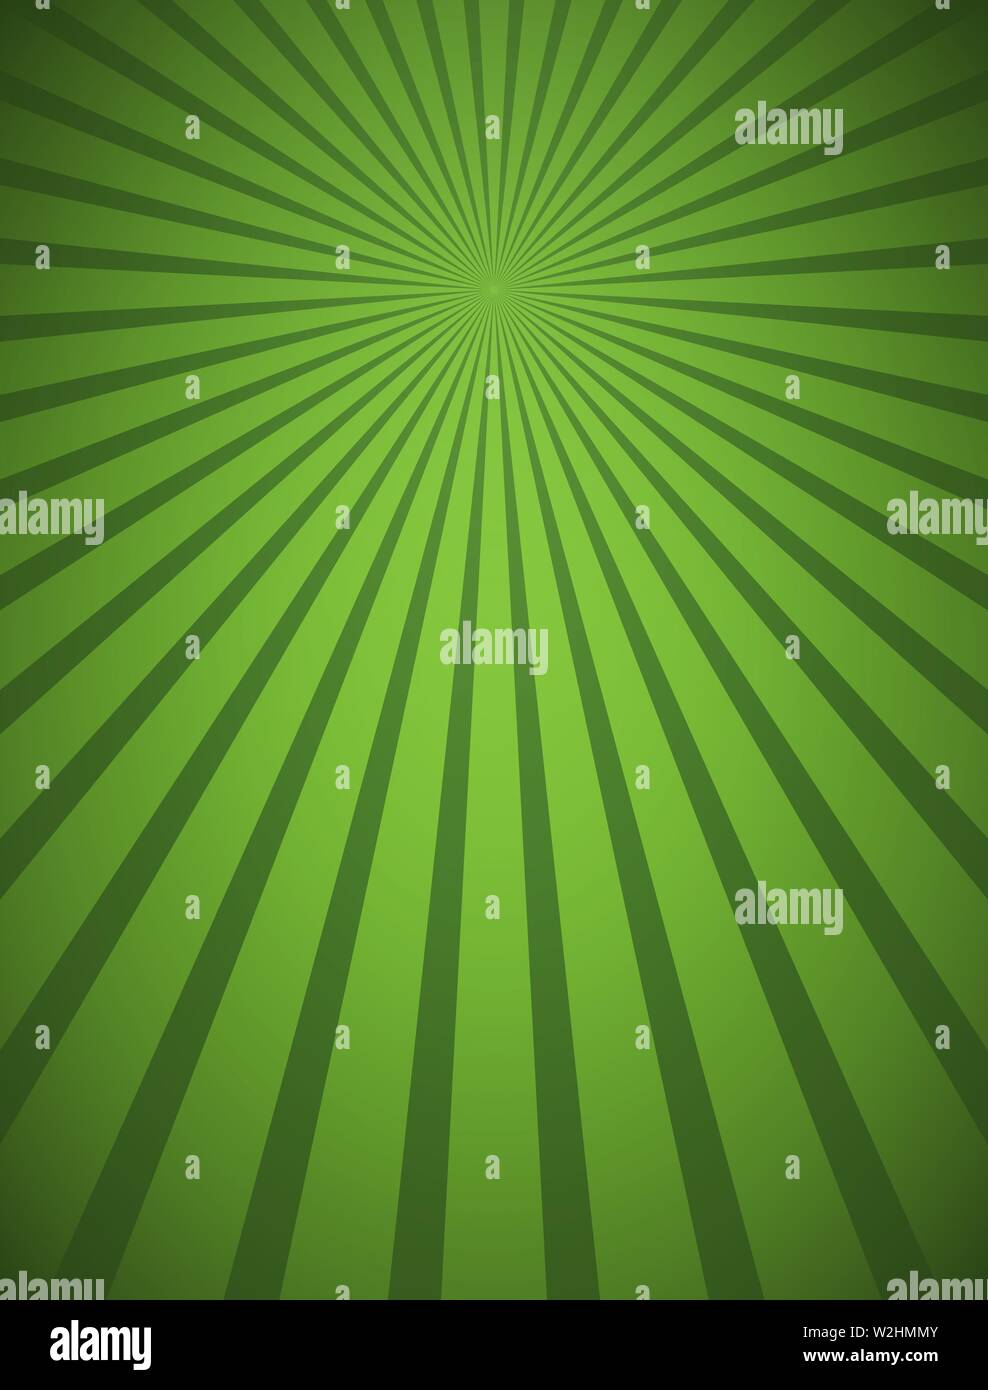 Green abstract vector illustration background with radial line beams and rays Stock Vector